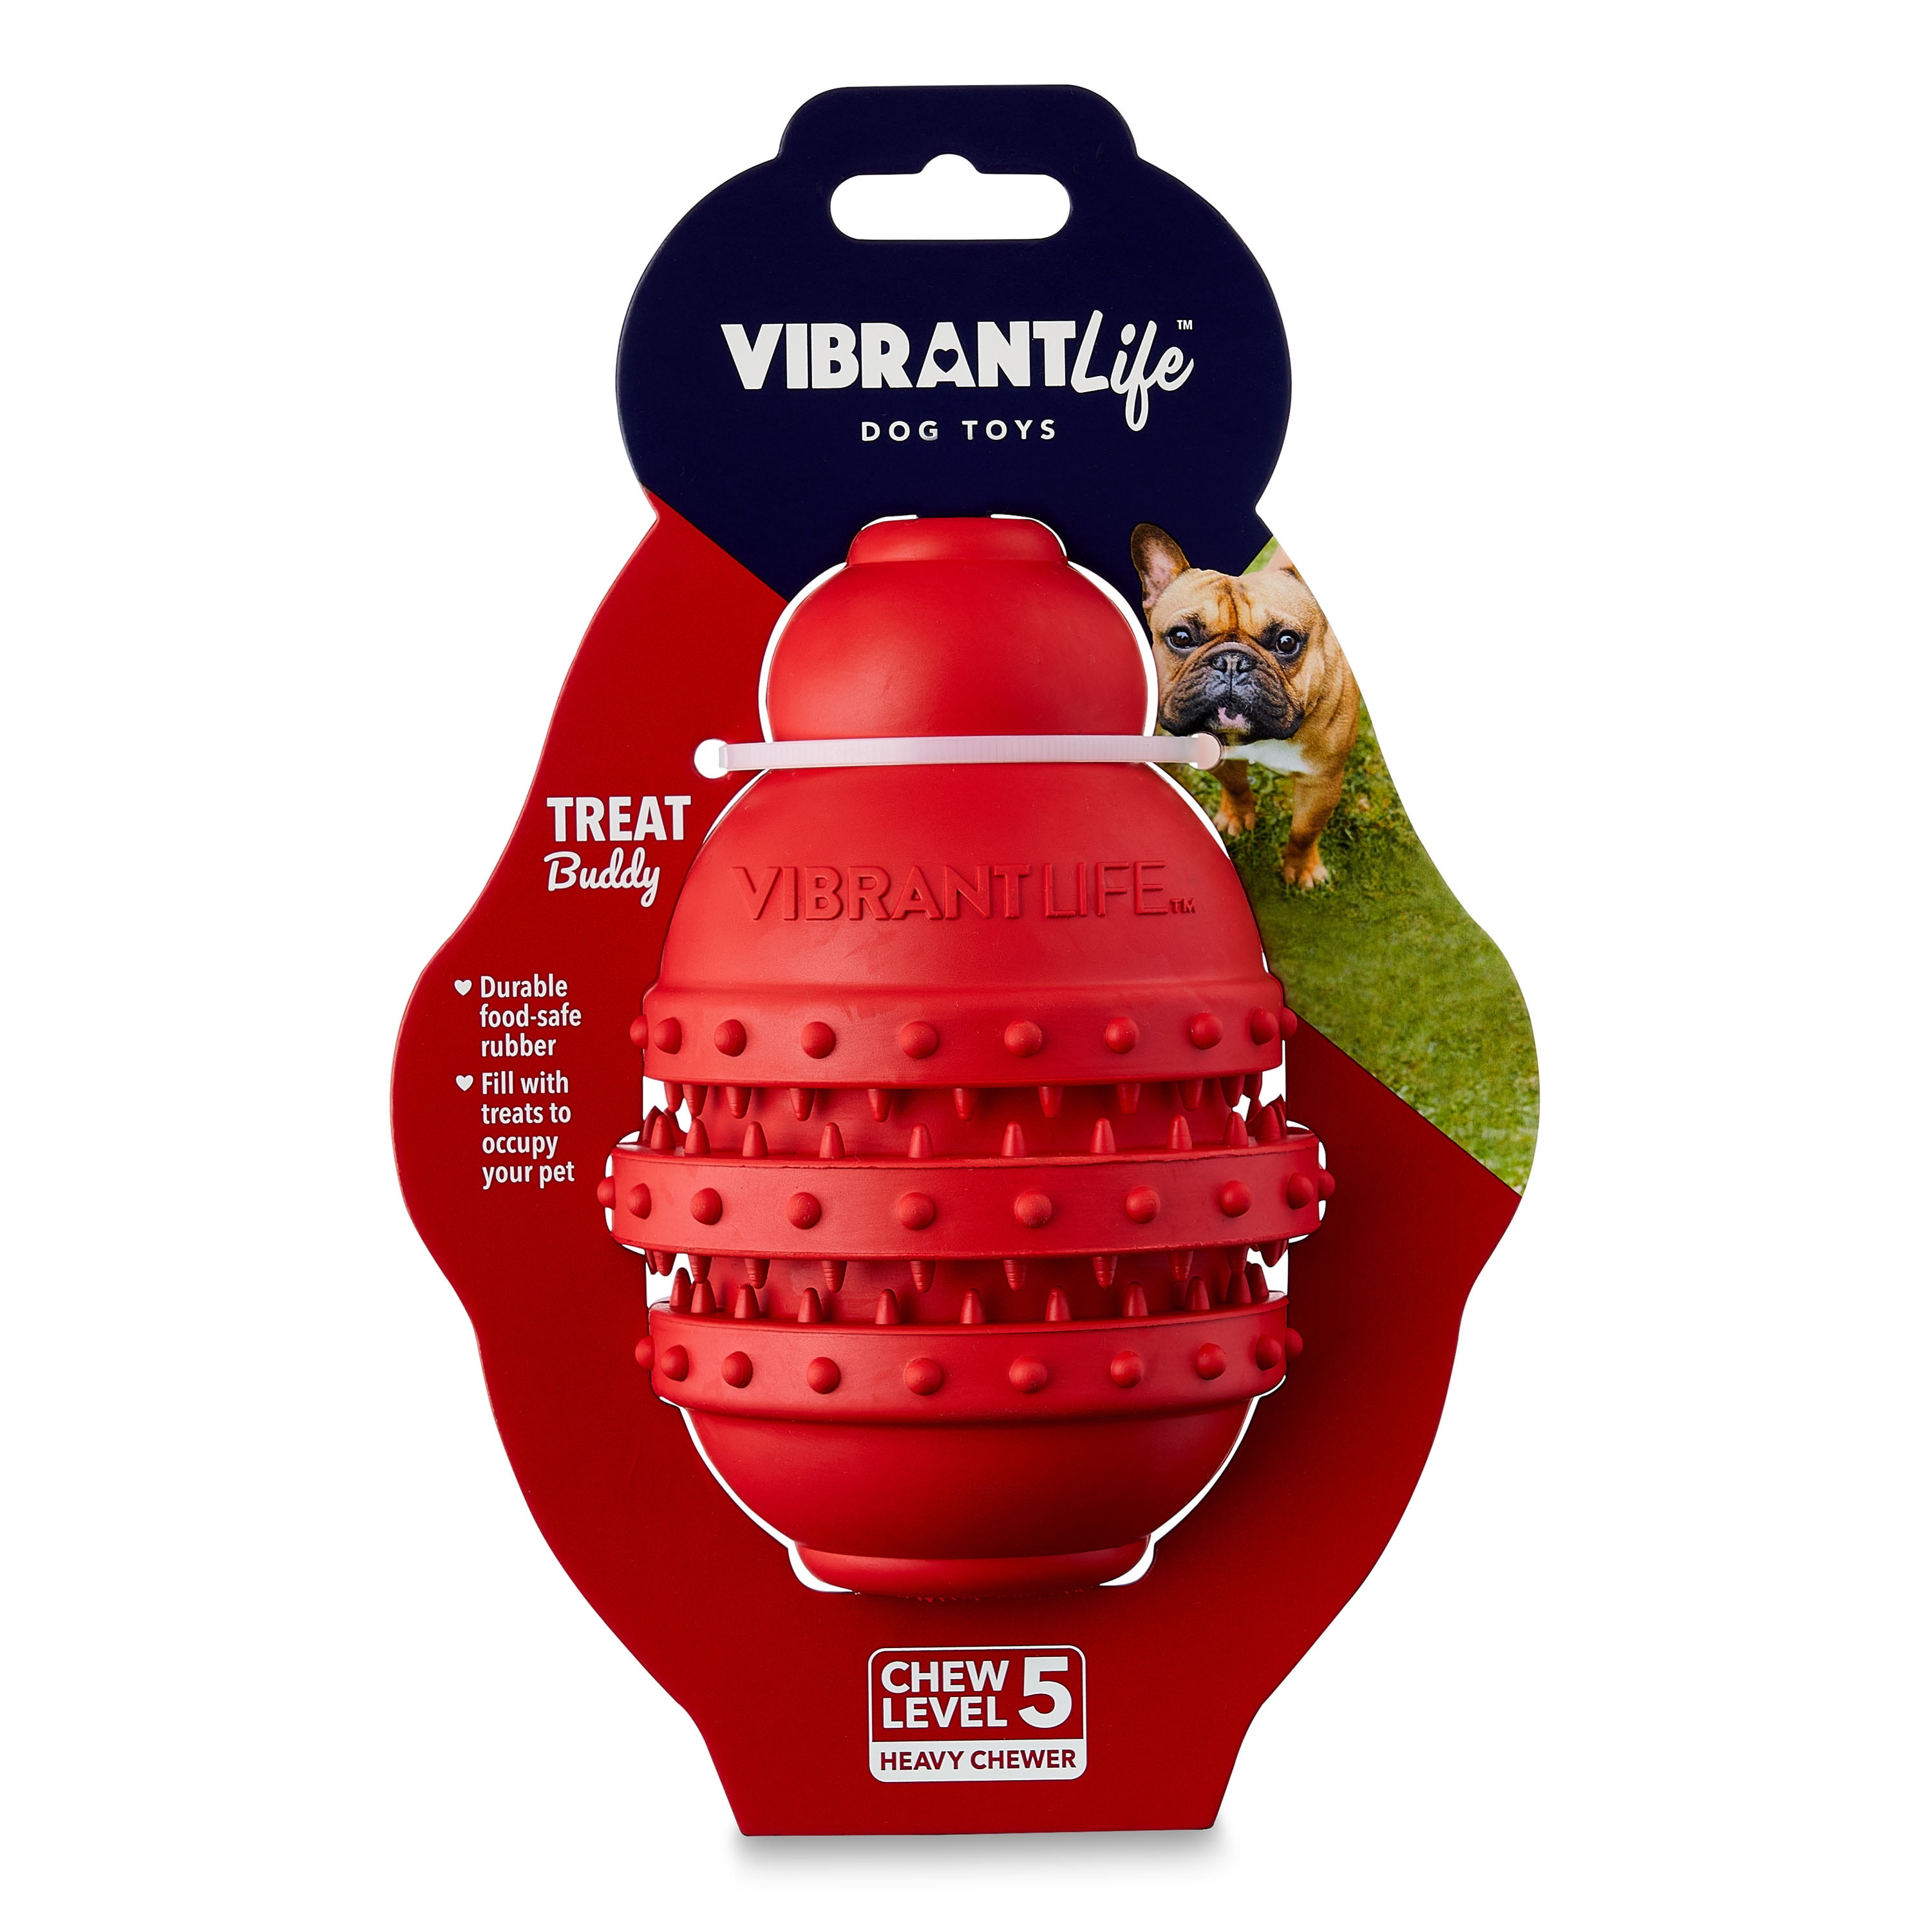 Vibrant Life Interactive Treat Dispensing Pizzeria Puzzler Dog Toy, Size: One Size